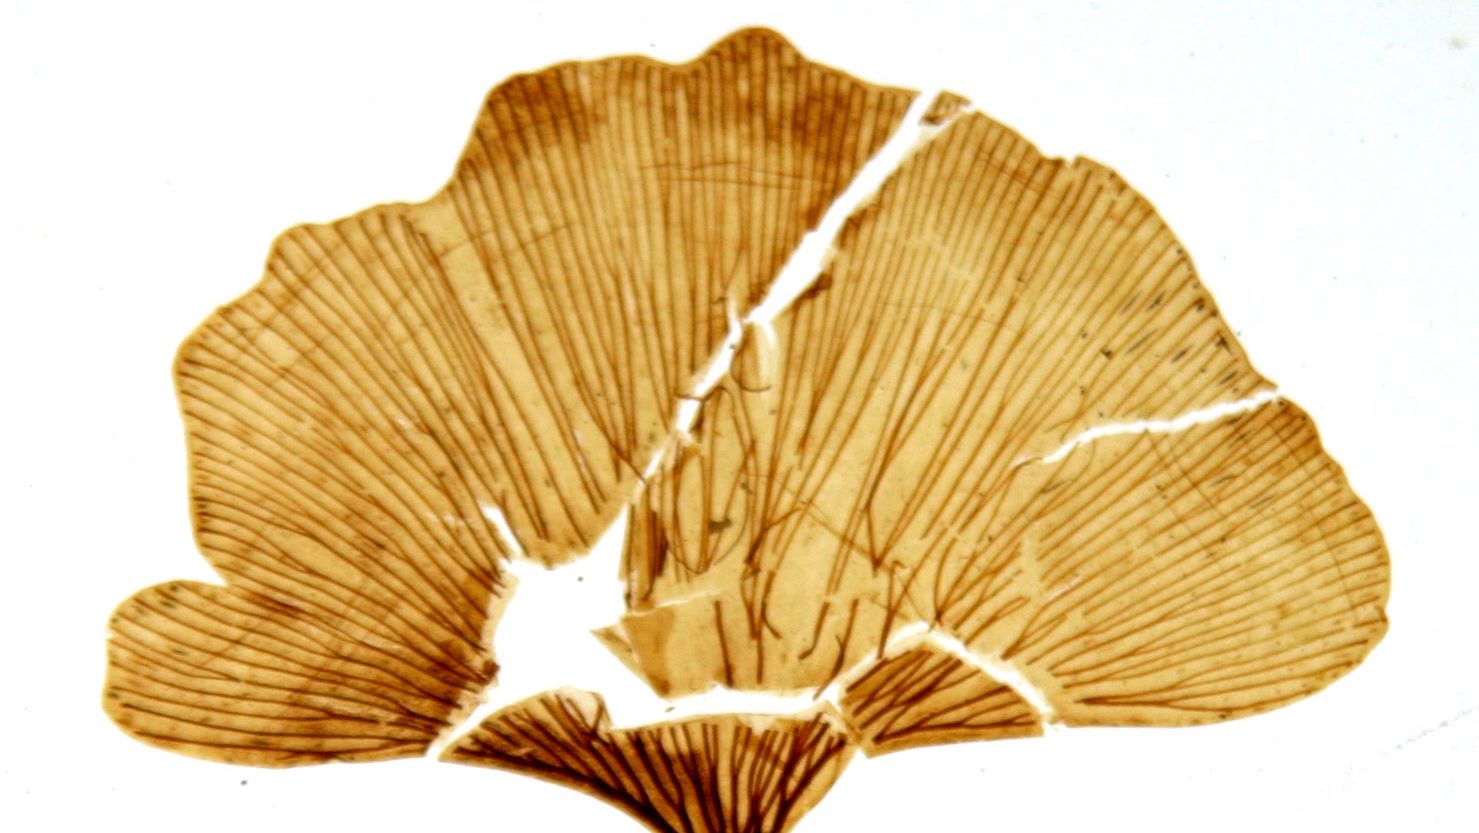 Pressed and dried ginkgo biloba leaf with visible veins and a tear.